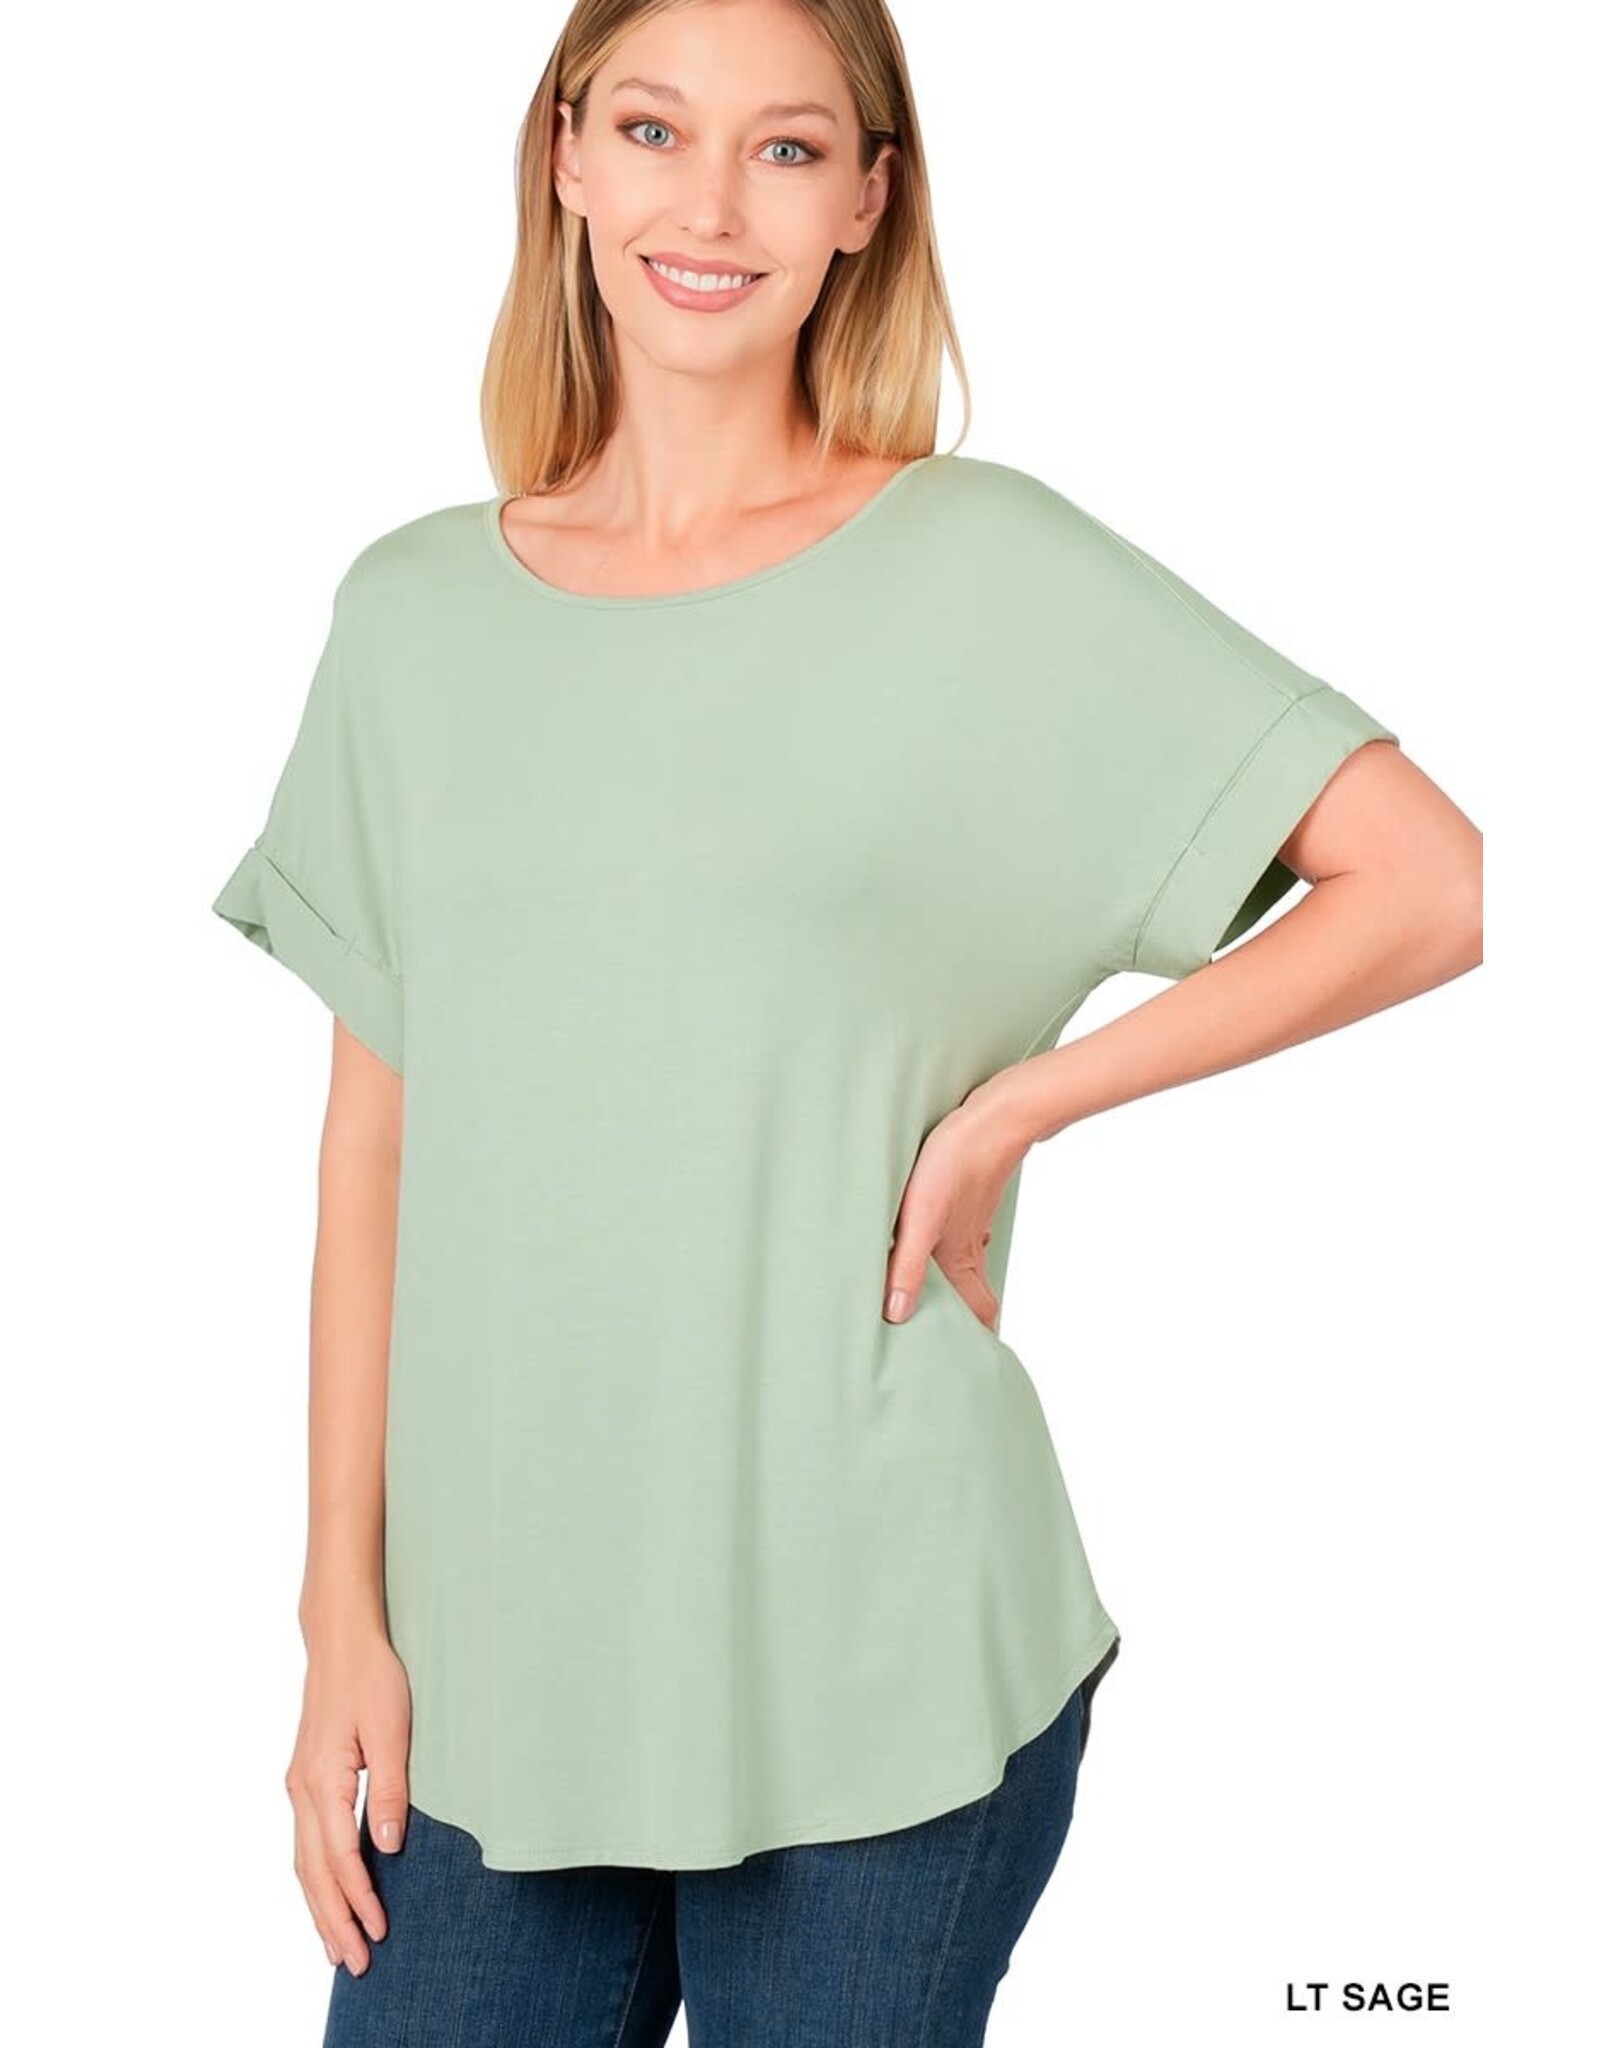 AT-45050 Boat Neck Top